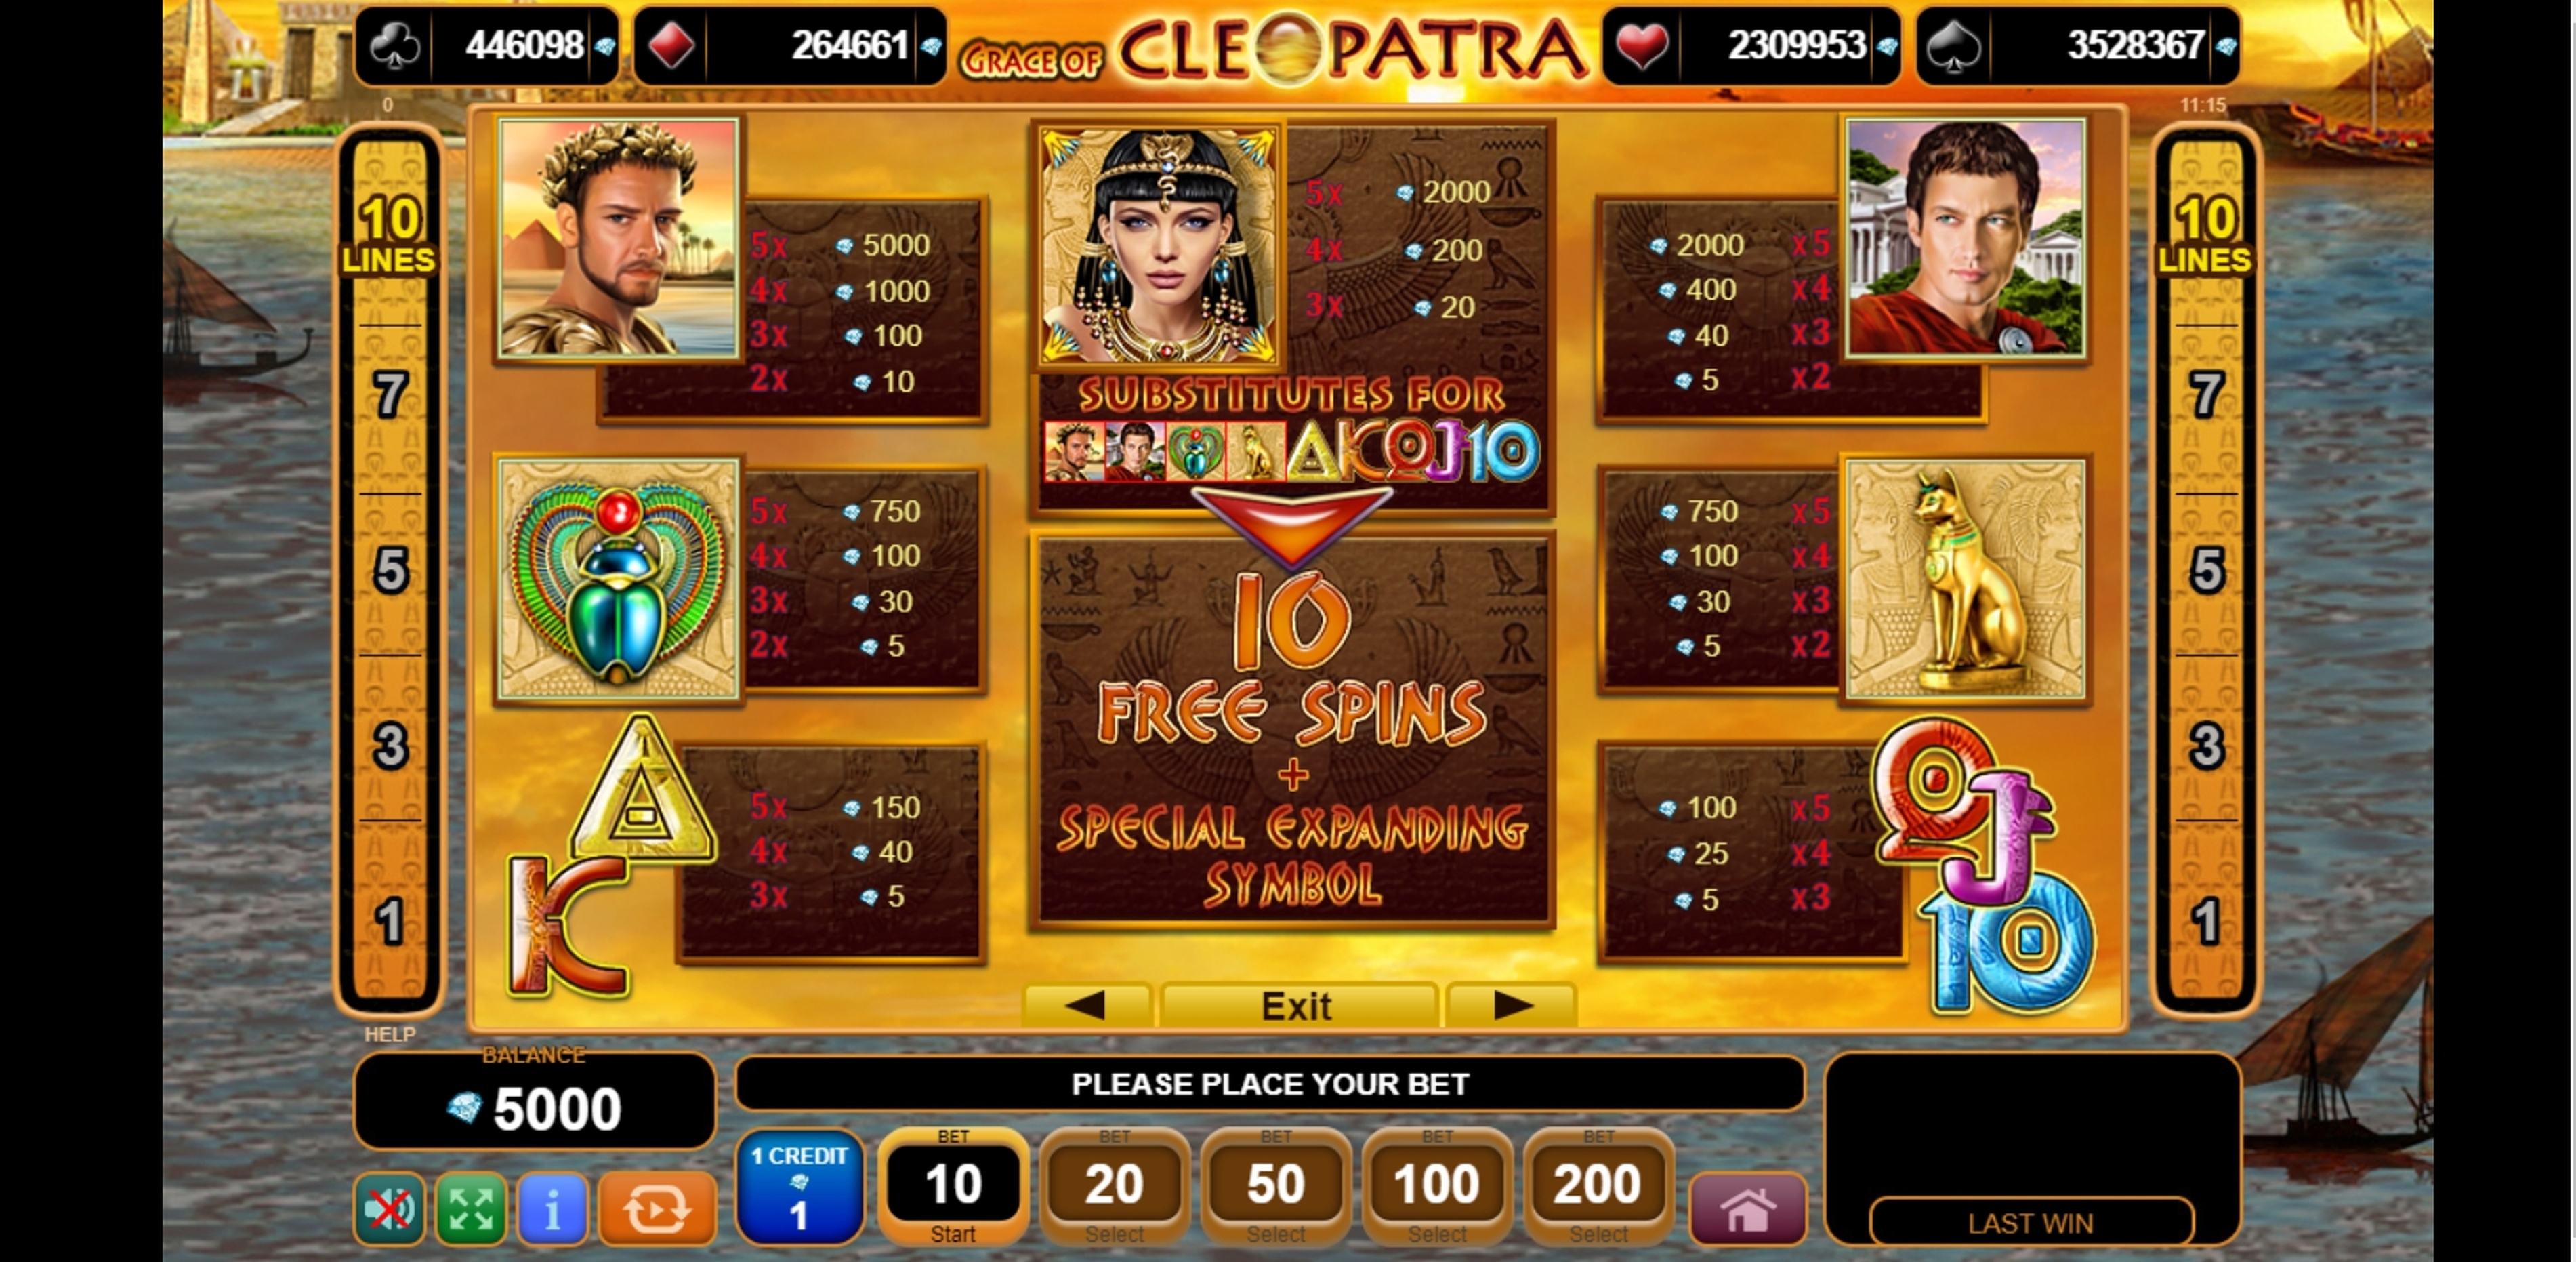 Info of Grace of Cleopatra Slot Game by EGT